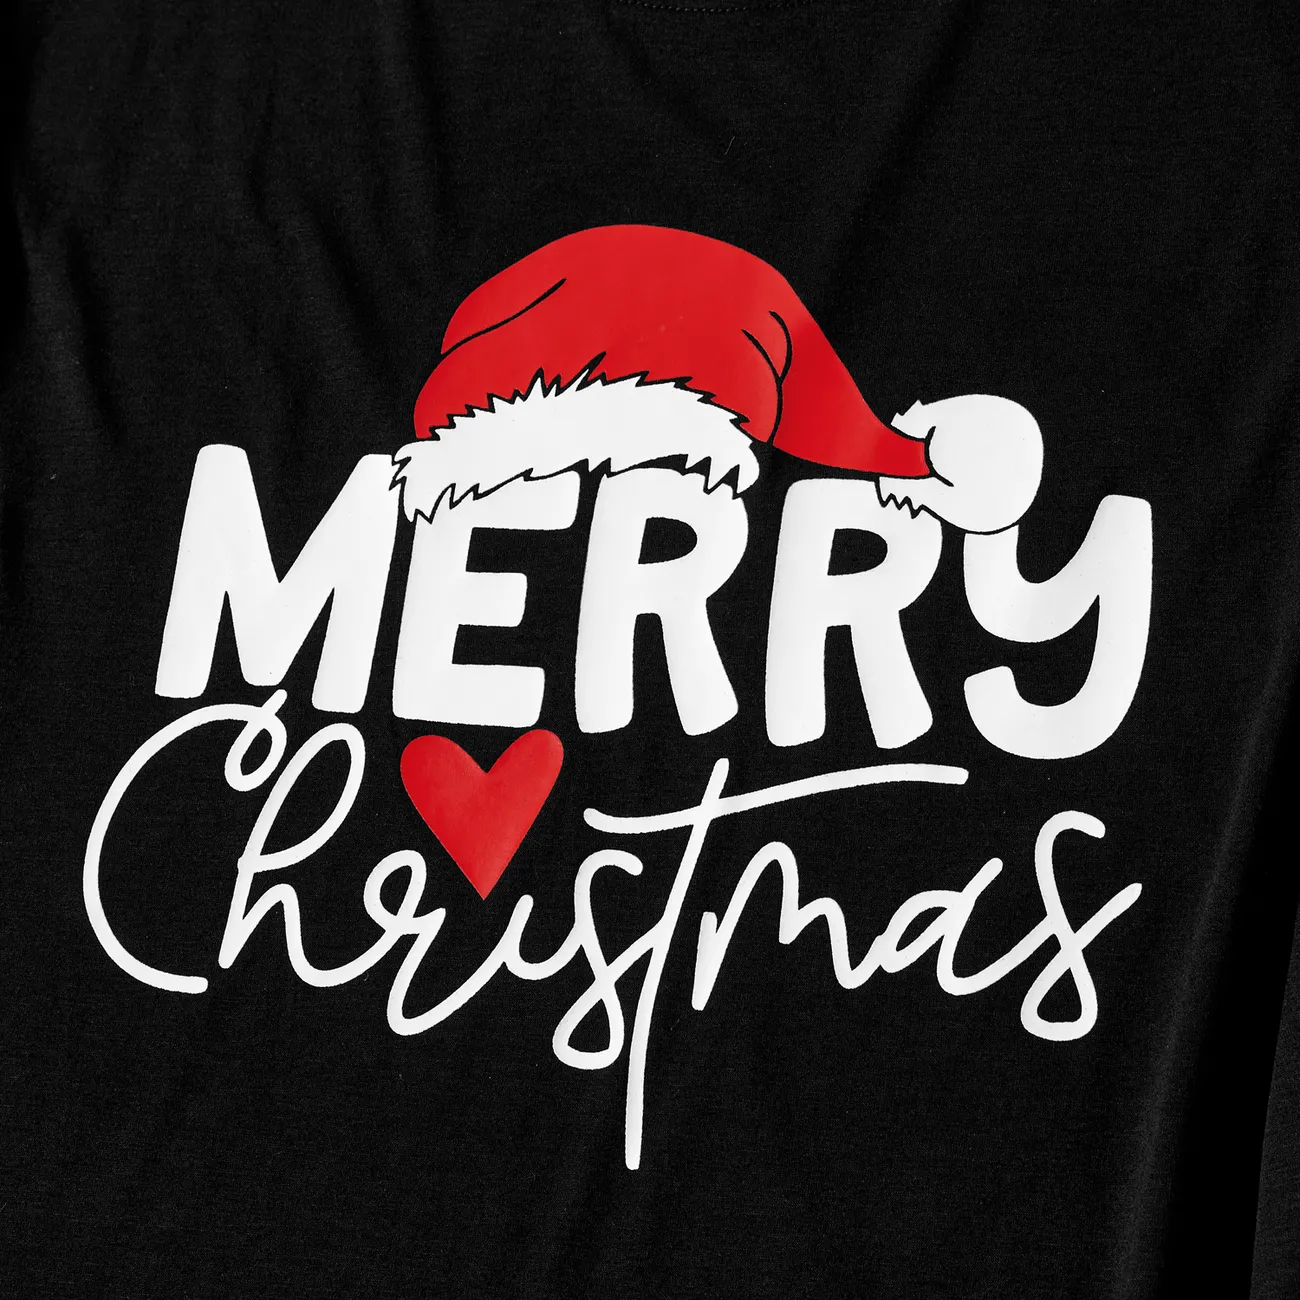 Christmas Family Matching Glow In The Dark Letters Print Long-sleeve Pajamas Sets (Flame resistant) Black/White big image 1